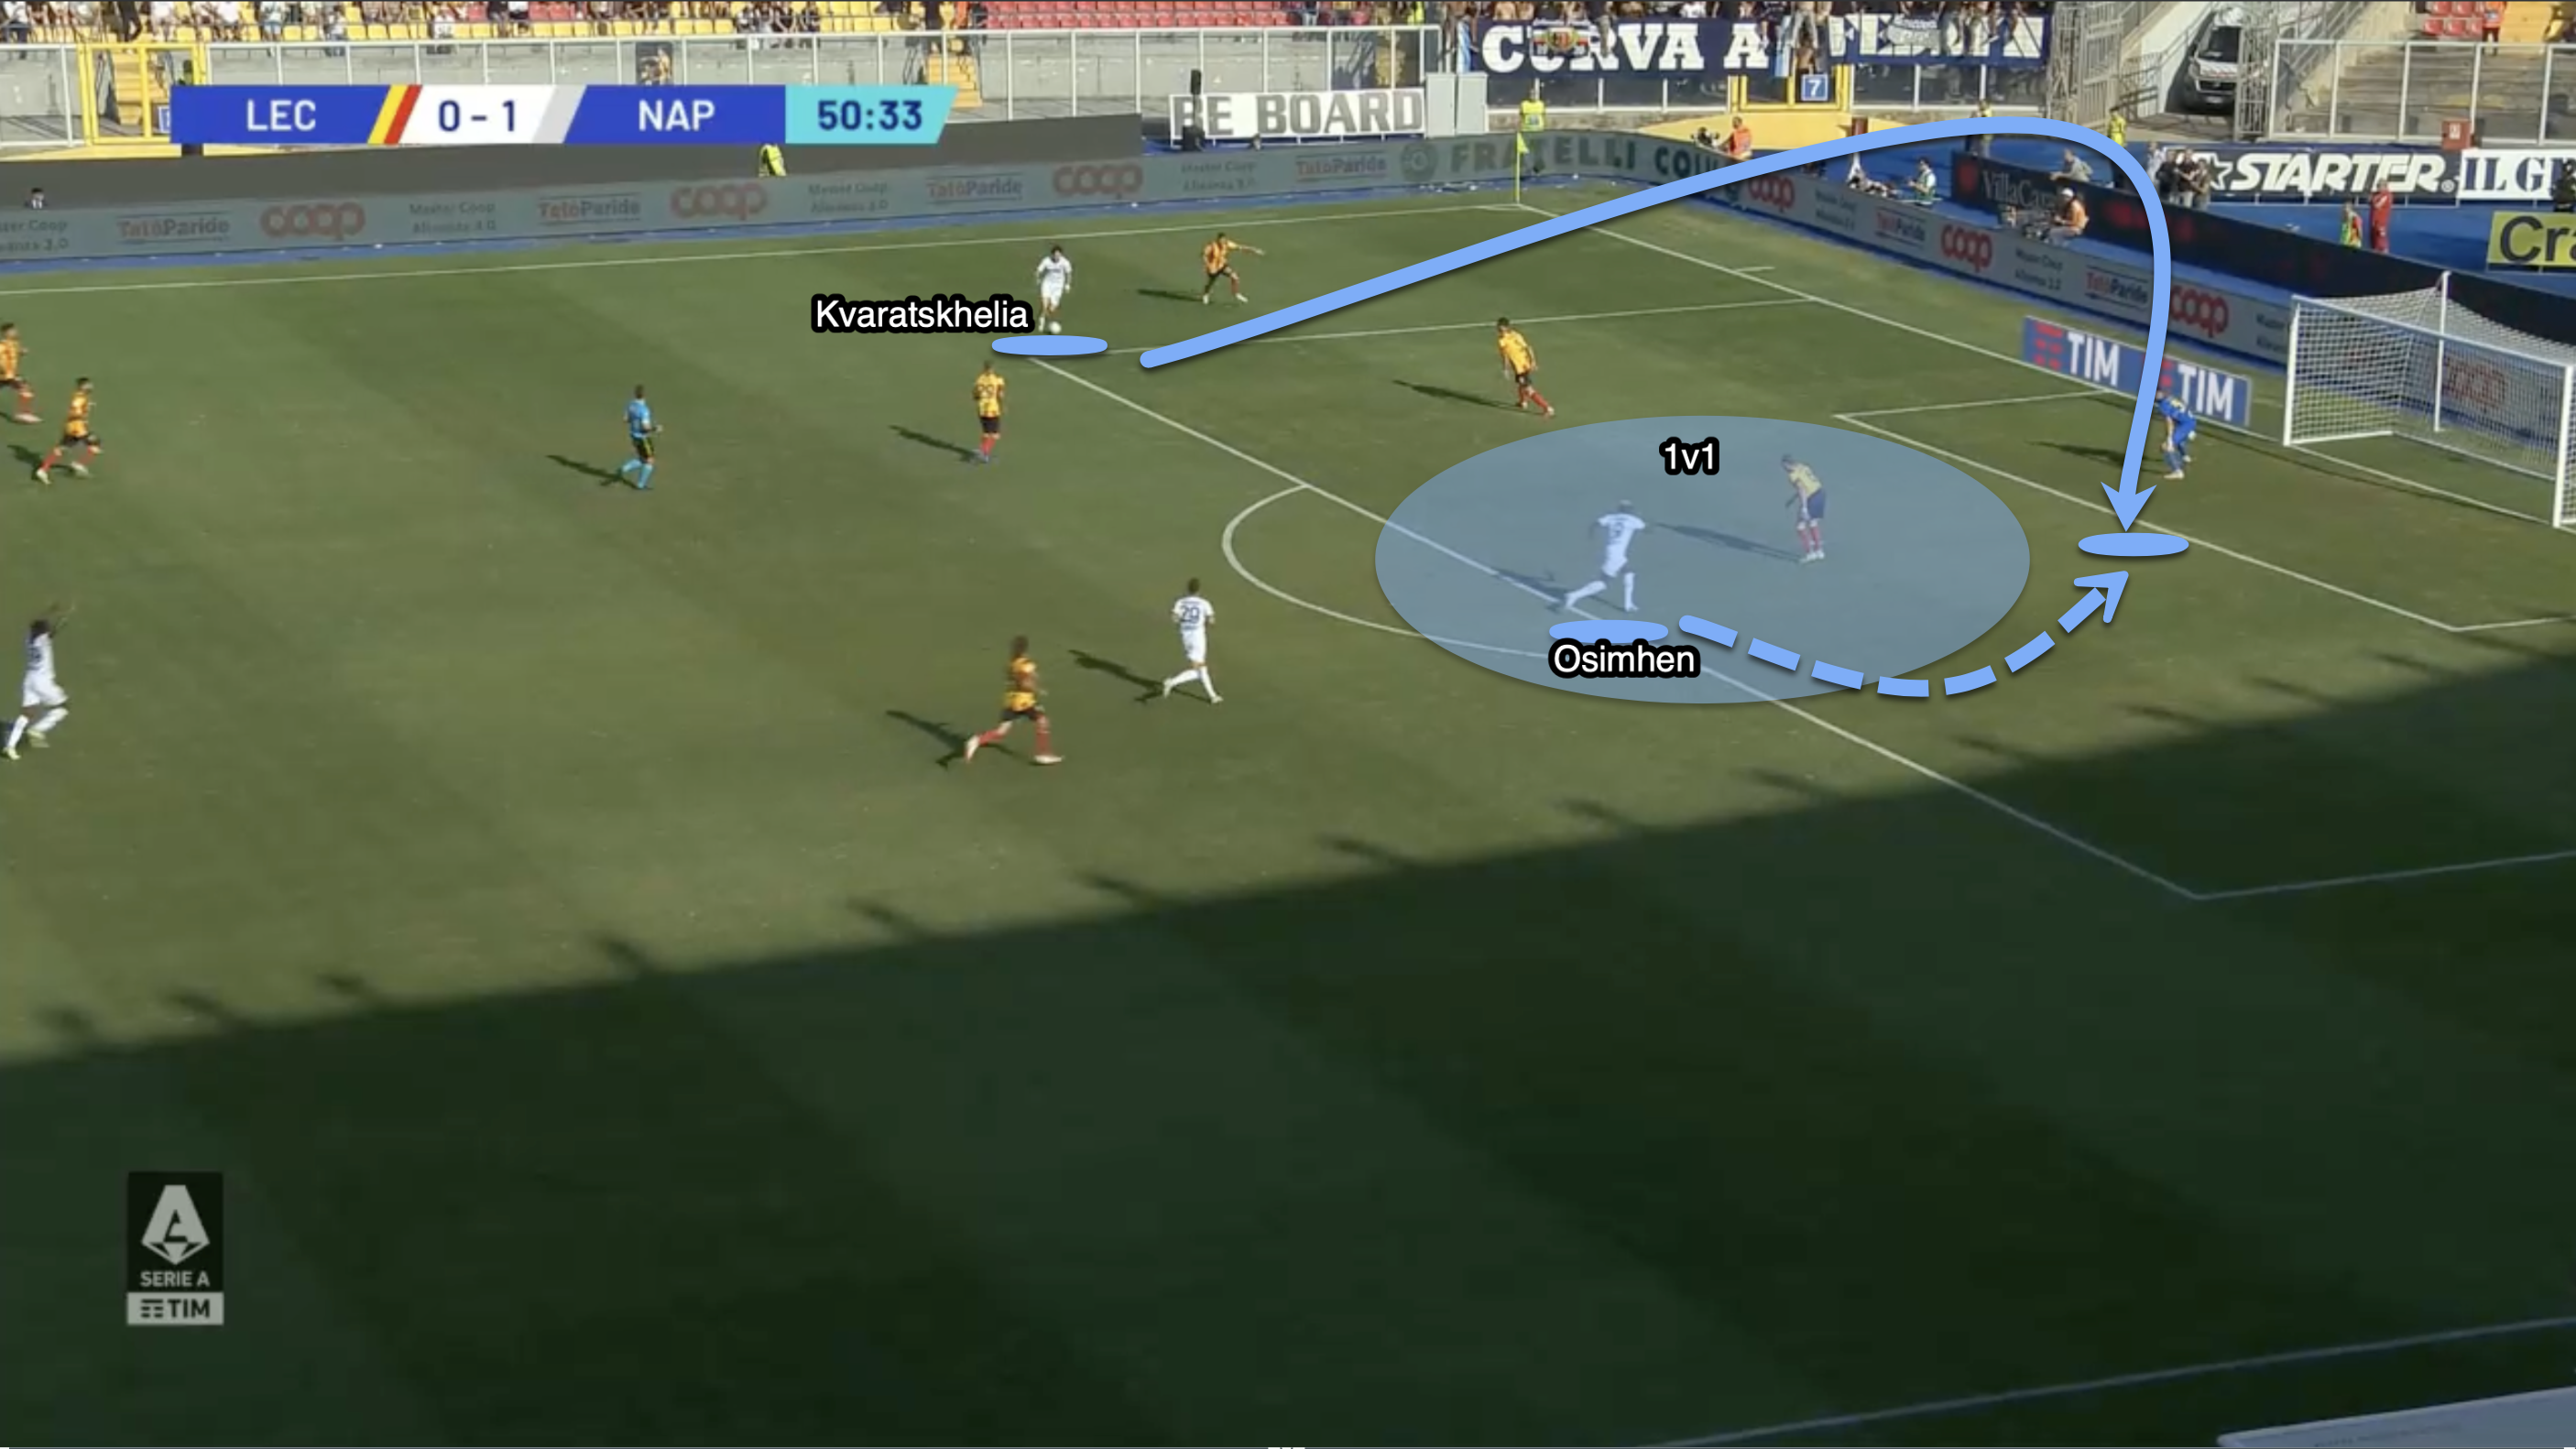 Here, we see Osimhen isolated at the far side of the area against a single defender. As Kvaratskhelia cuts back to his right foot we see Osimhen pull off the blind side of the defender before making a strong movement towards goal to meet the ball